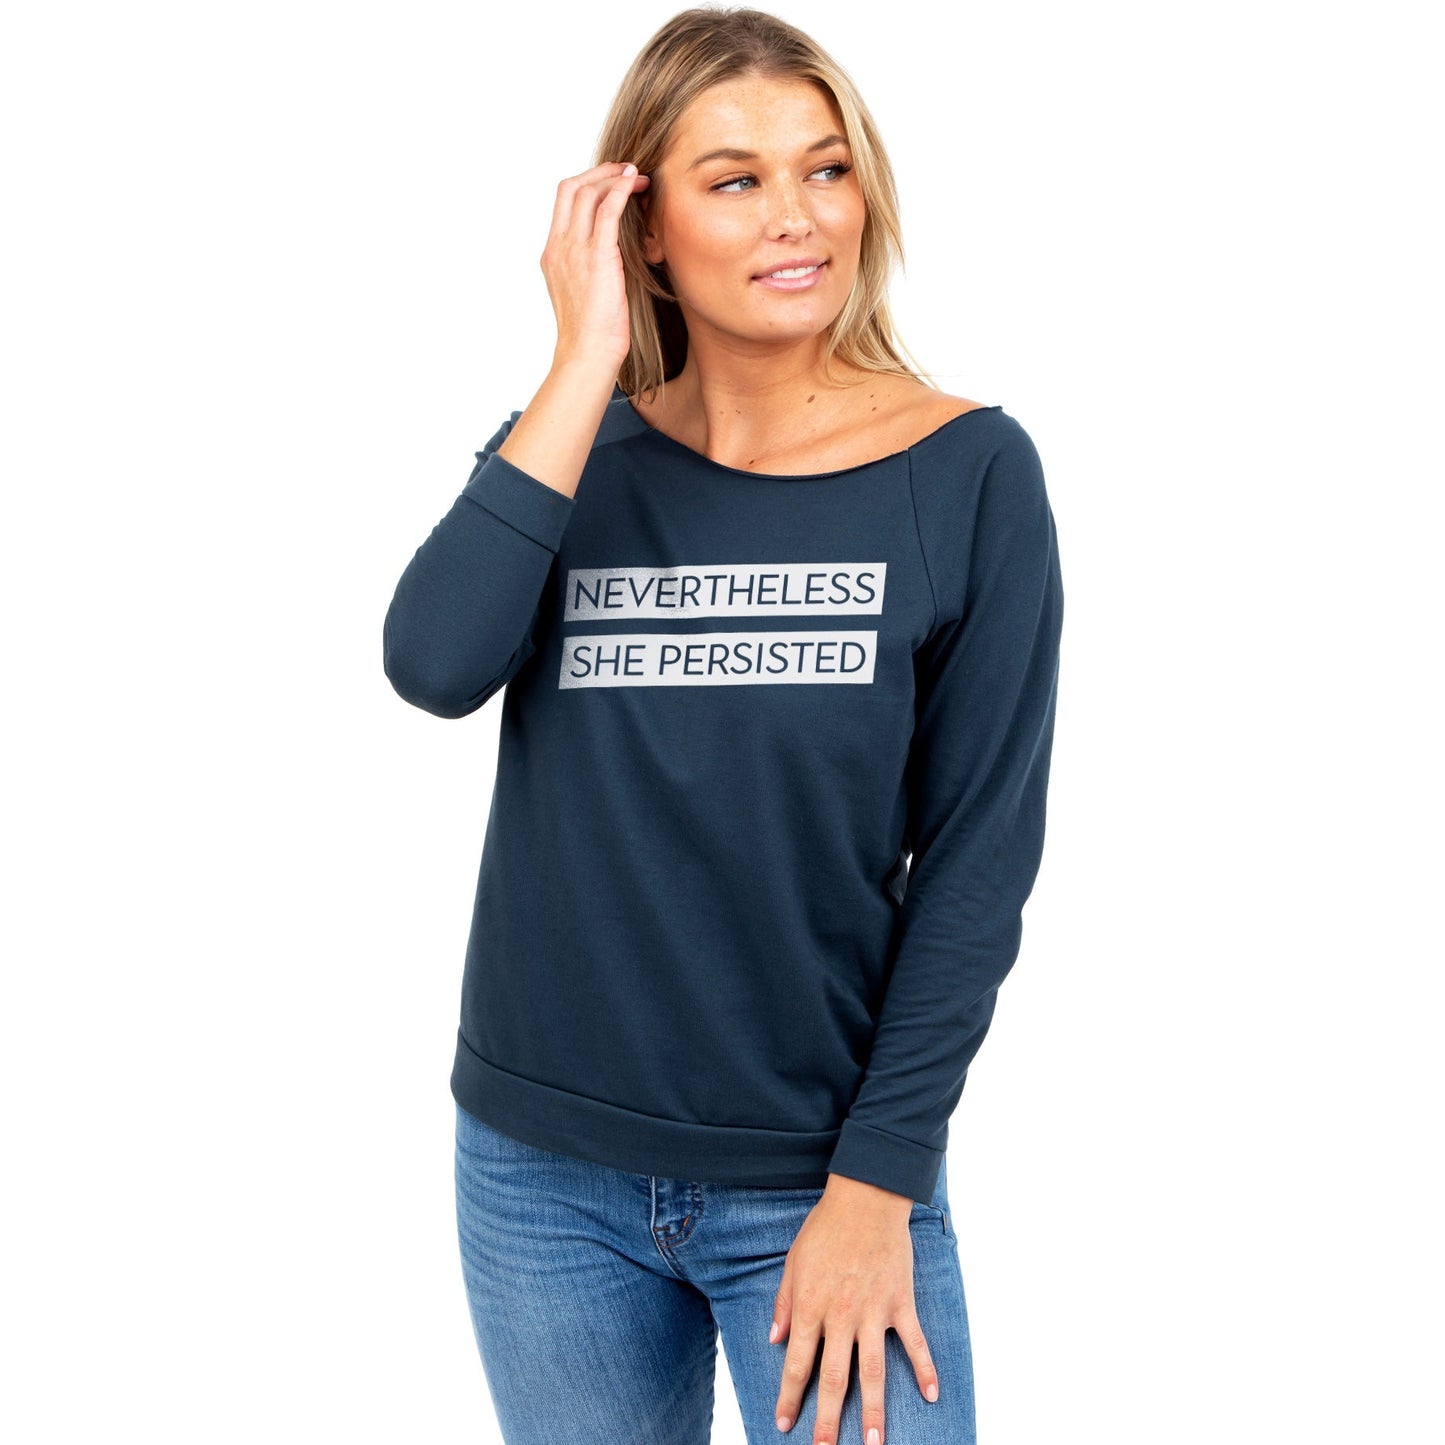 Nevertheless She Persisted Women's Graphic Printed Lightweight Slouchy 3/4 Sleeves Sweatshirt Navy Model